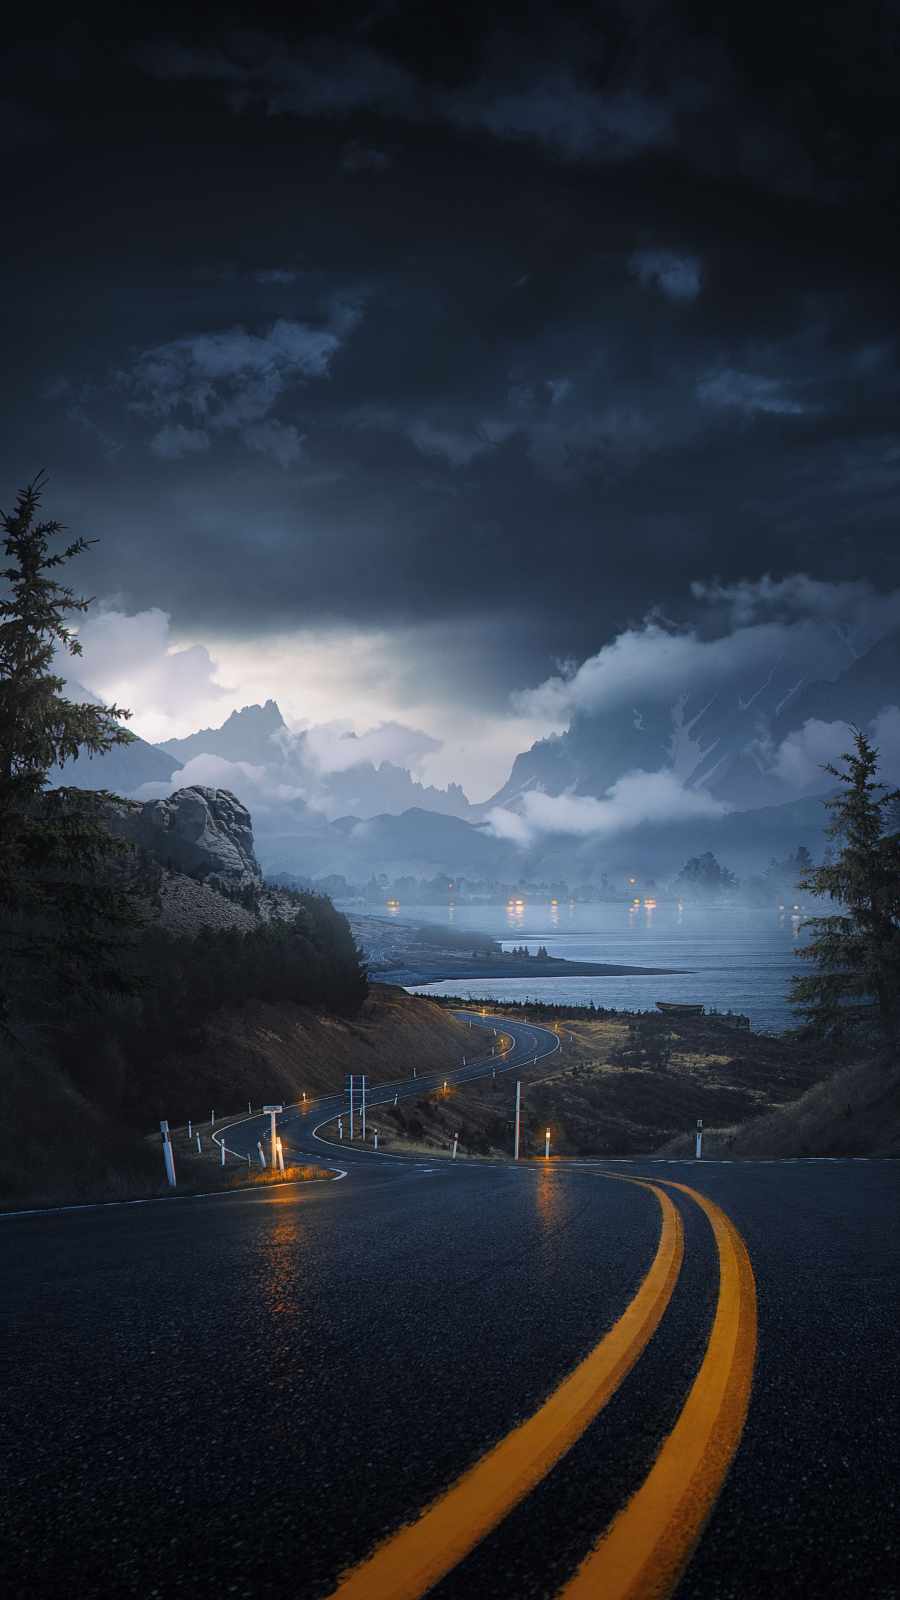 Cloudy Road Scenery IPhone Wallpaper - IPhone Wallpapers : iPhone Wallpapers